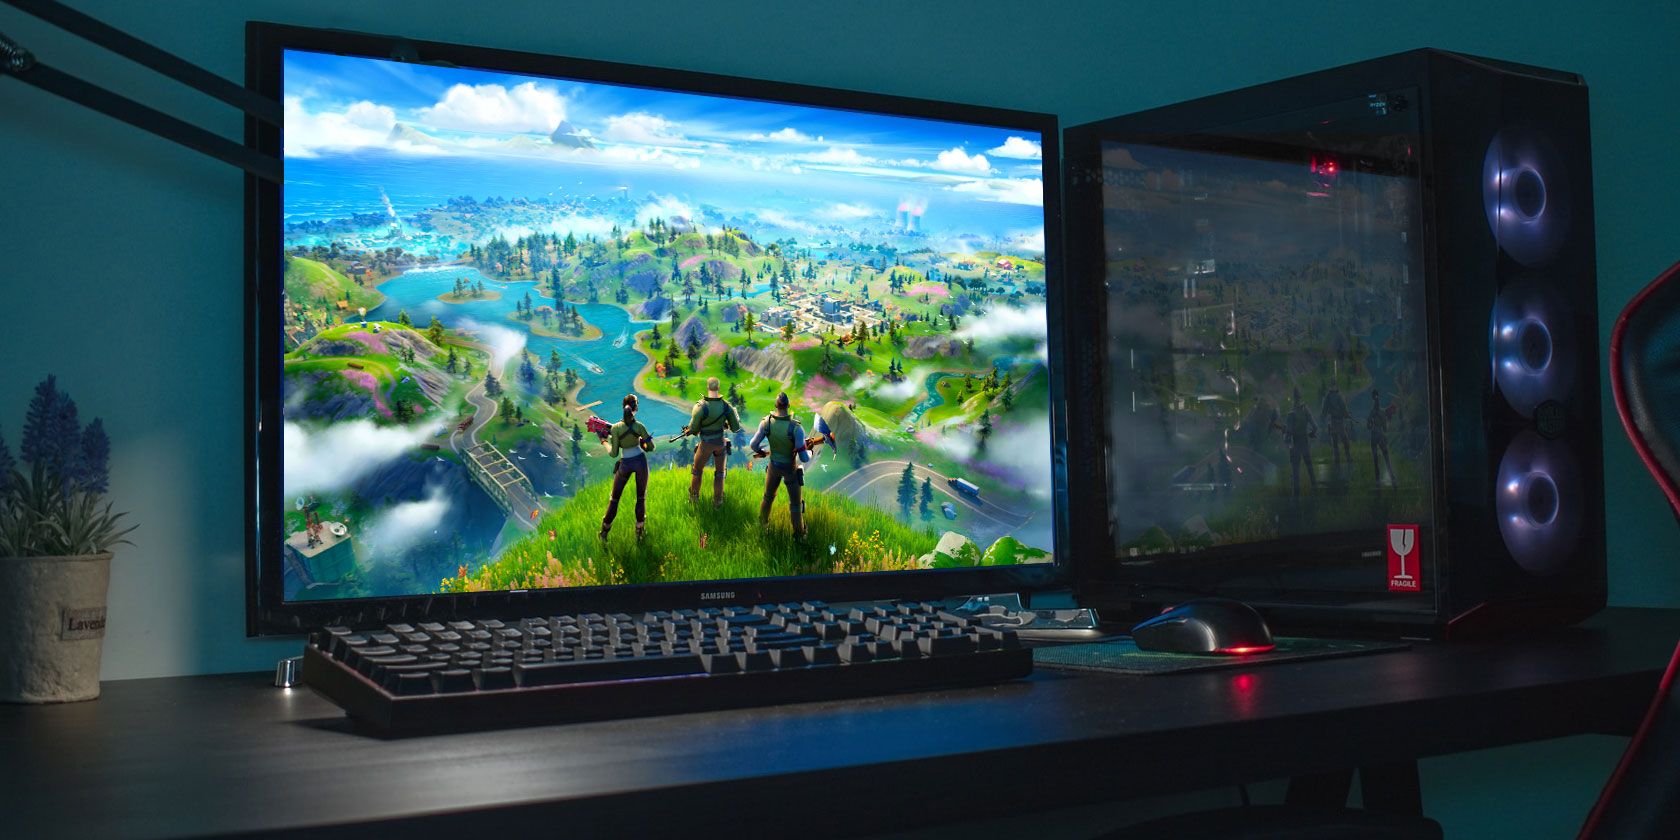 CyberPowerPC’s Best Gaming PCs for Fortnite